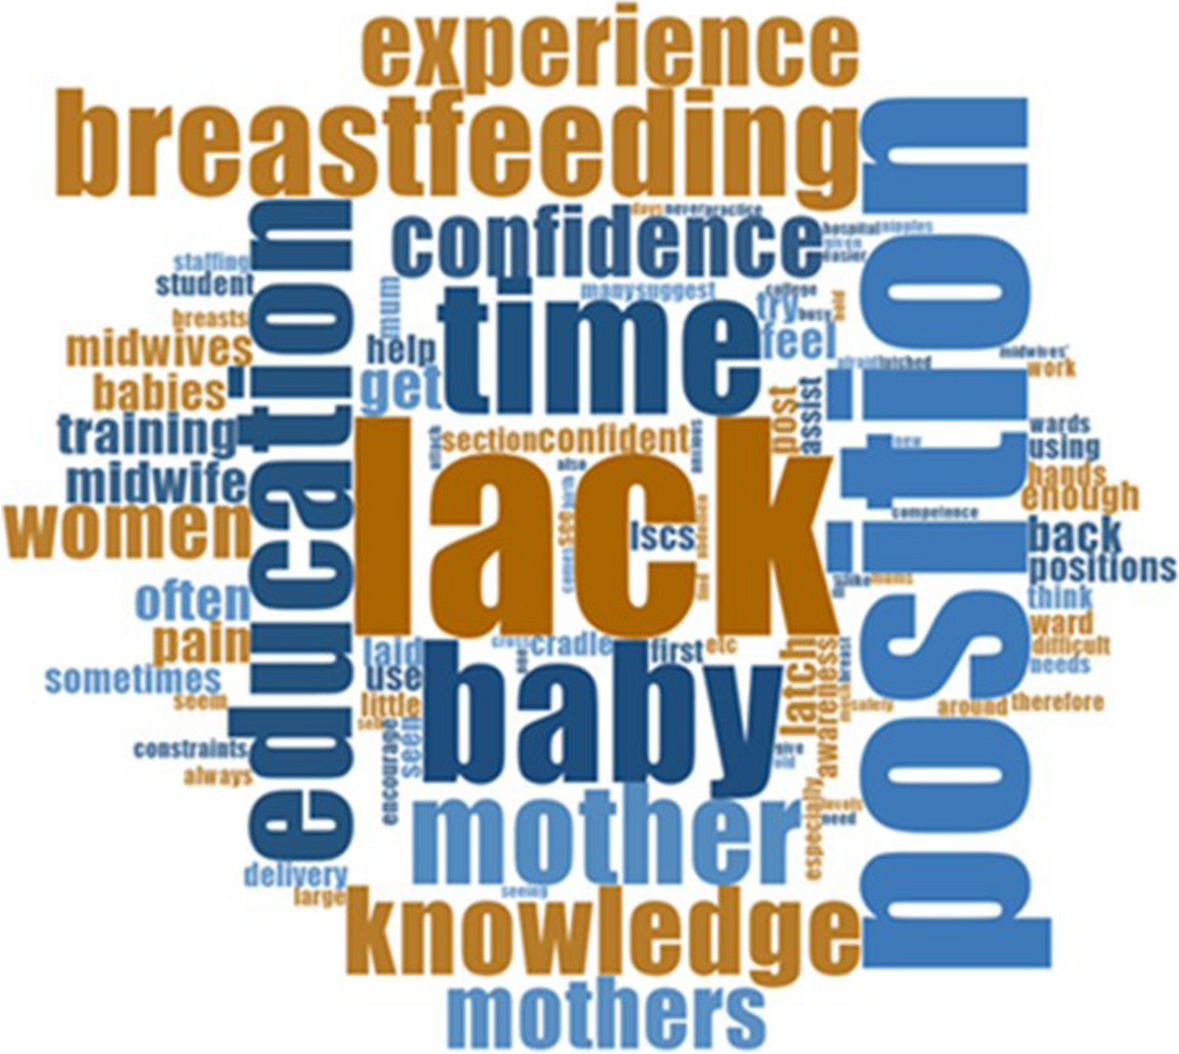 Laid-back breastfeeding: knowledge, attitudes and practices of midwives and student midwives in Ireland